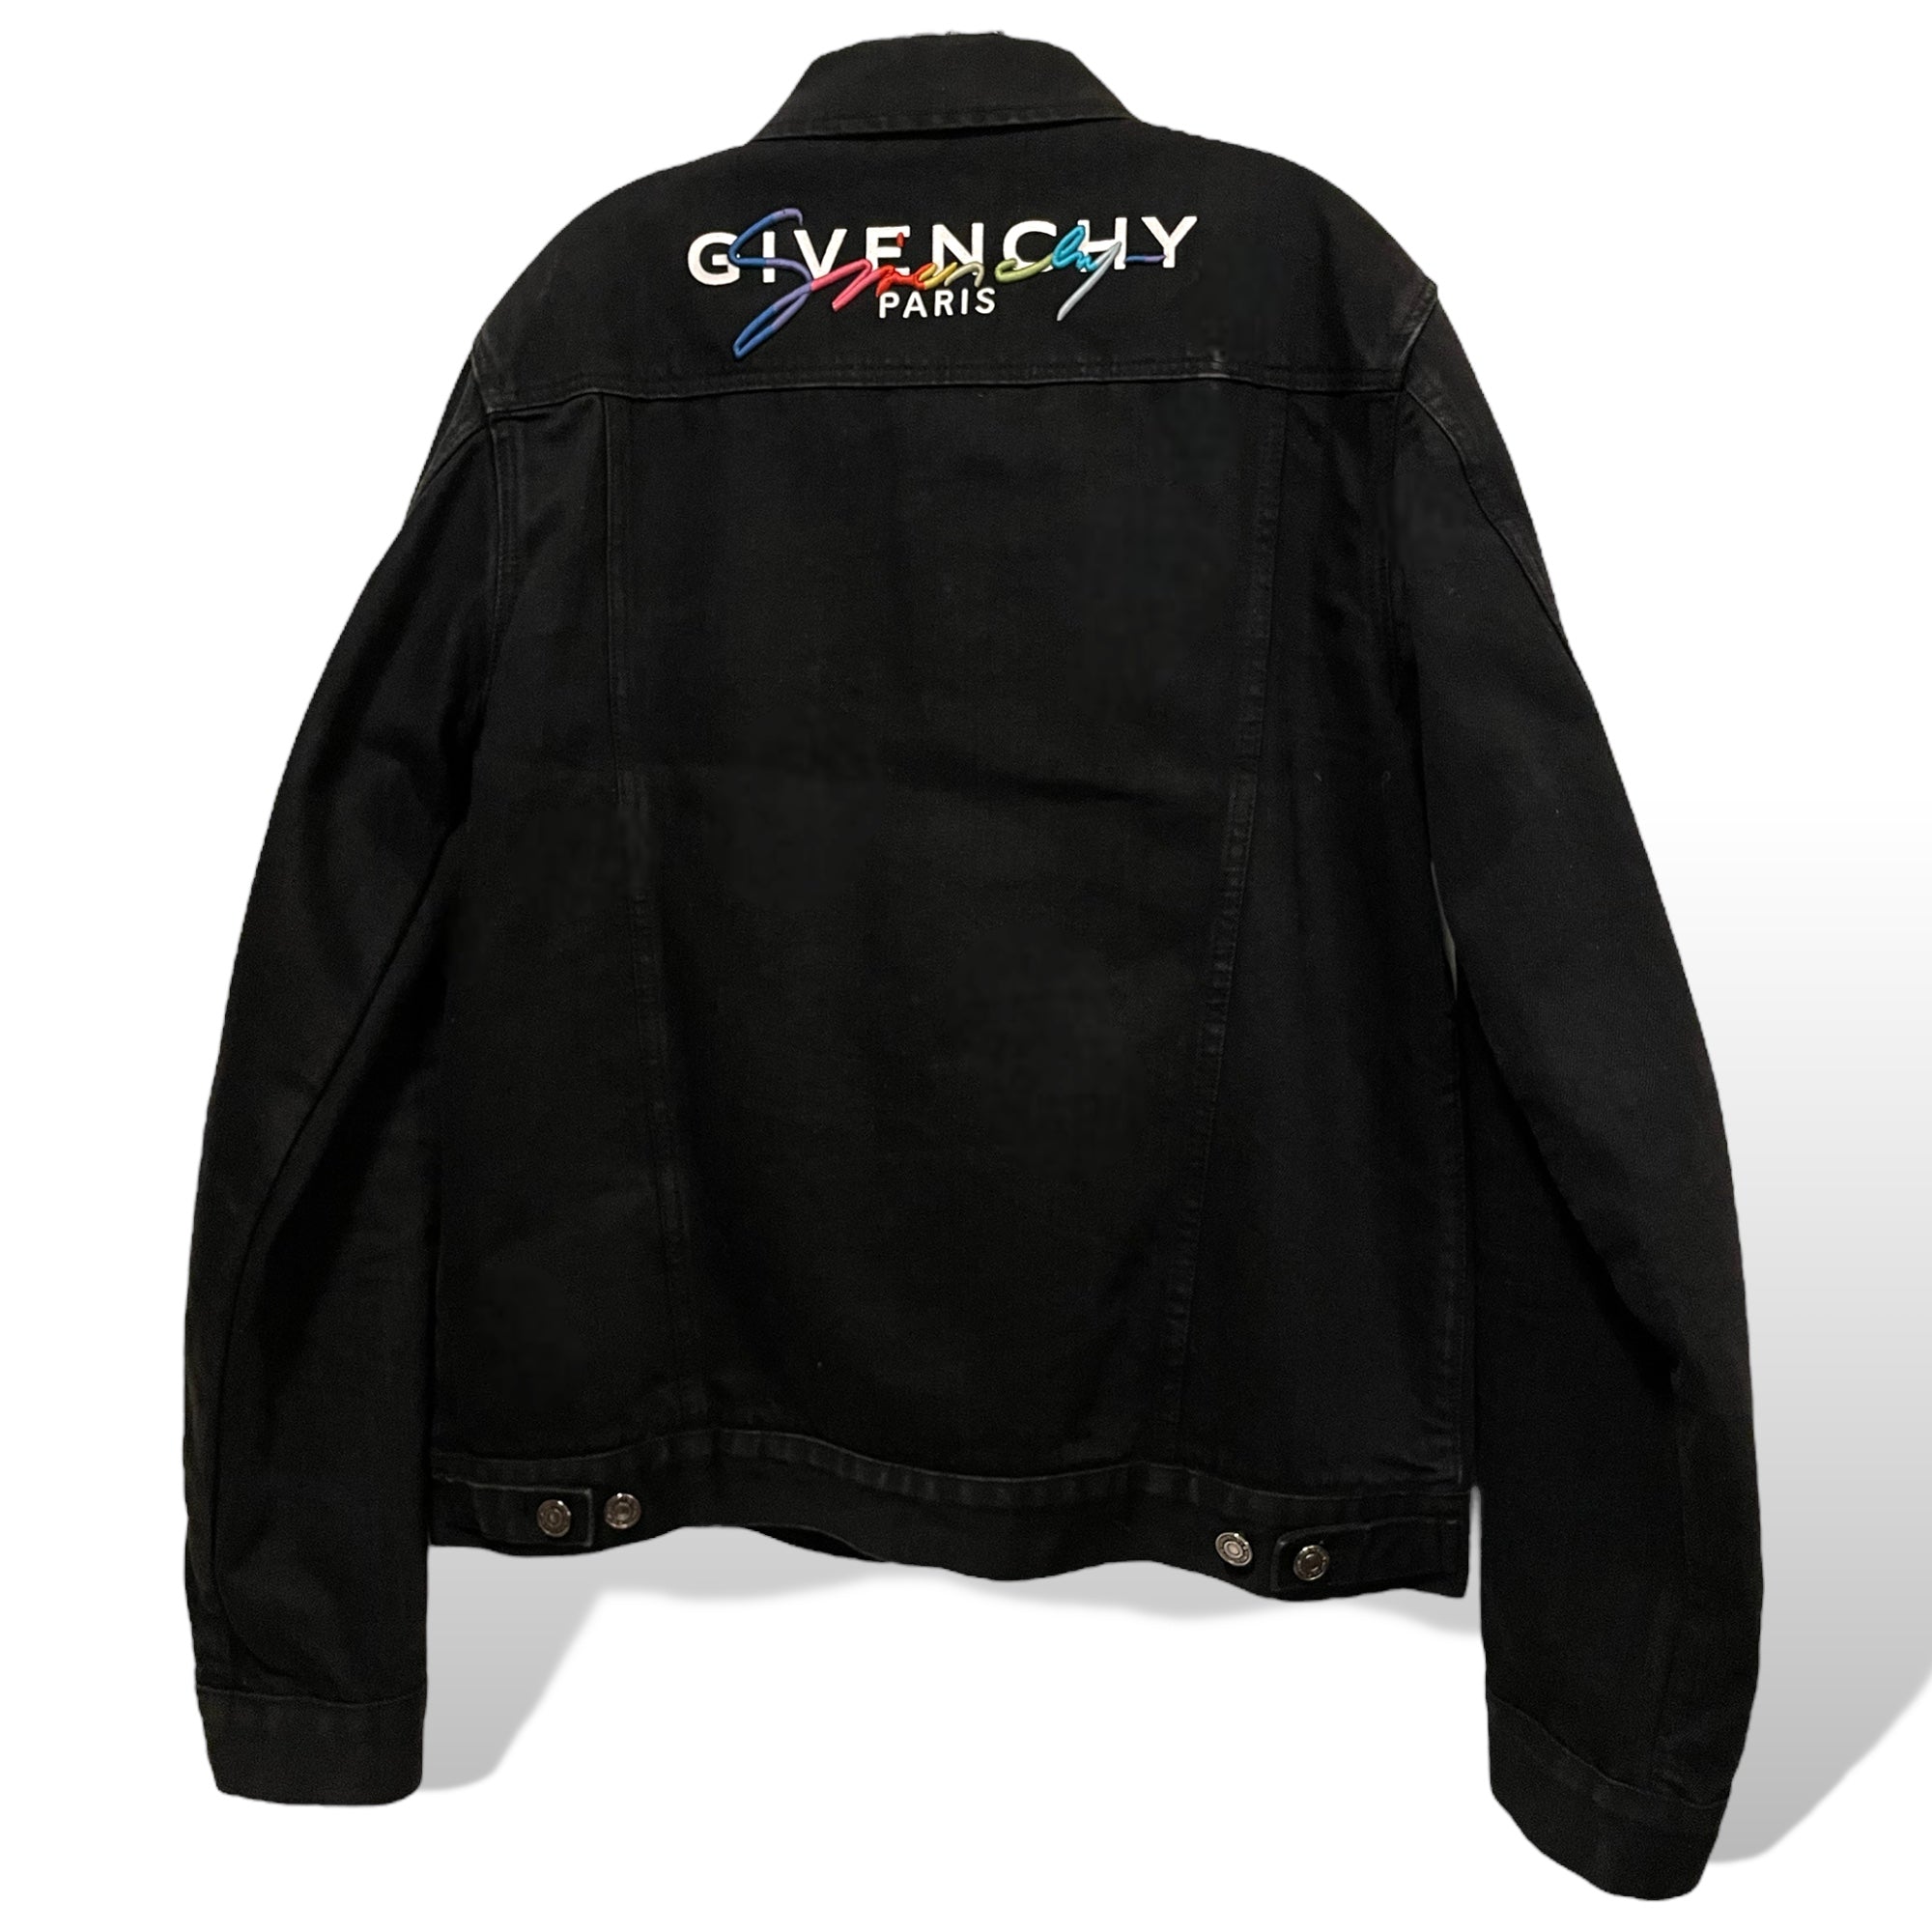 GIVENCHY Men's Denim Embroidered Logo Jacket |Size: XL| Made in Italy